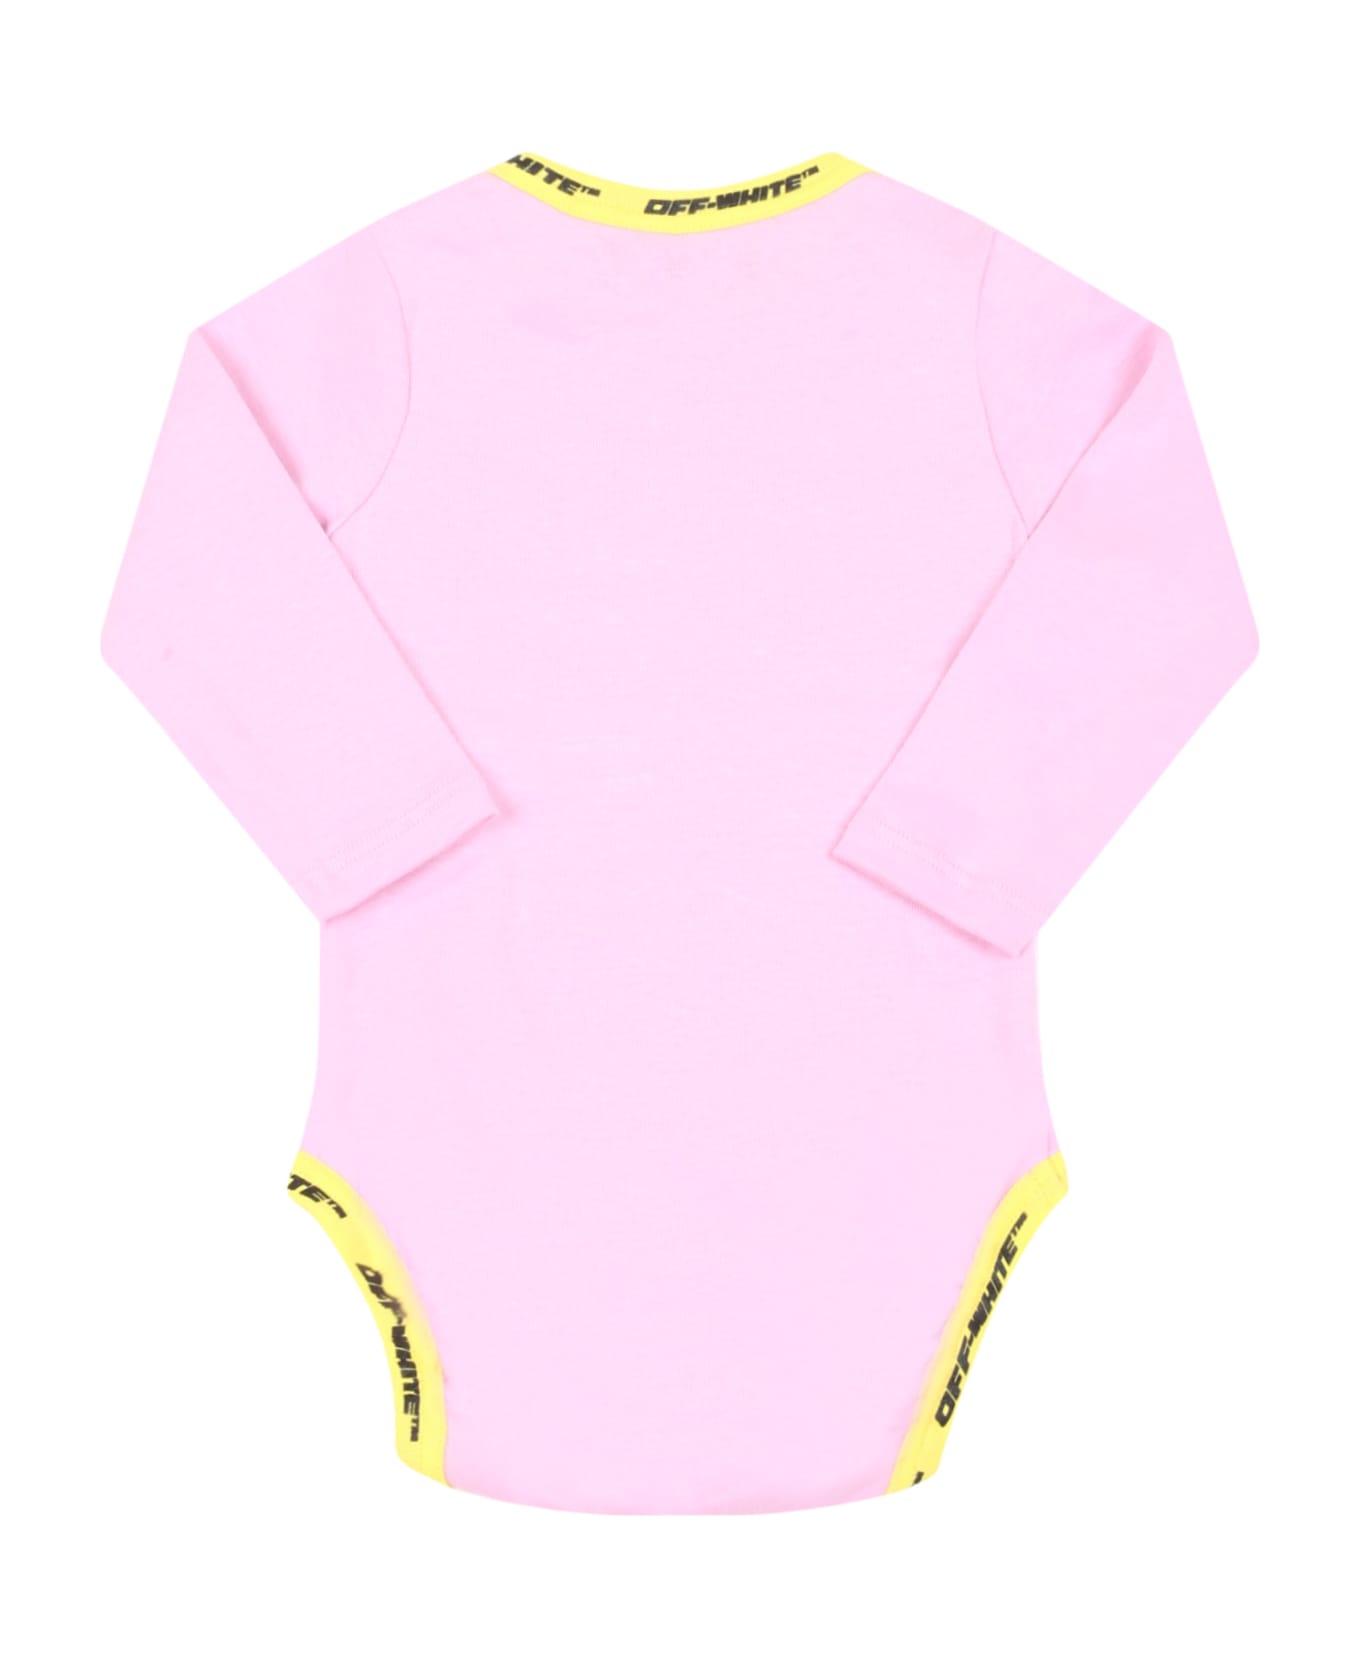 Off-White Pink Body For Baby Girl With Logos - Pink